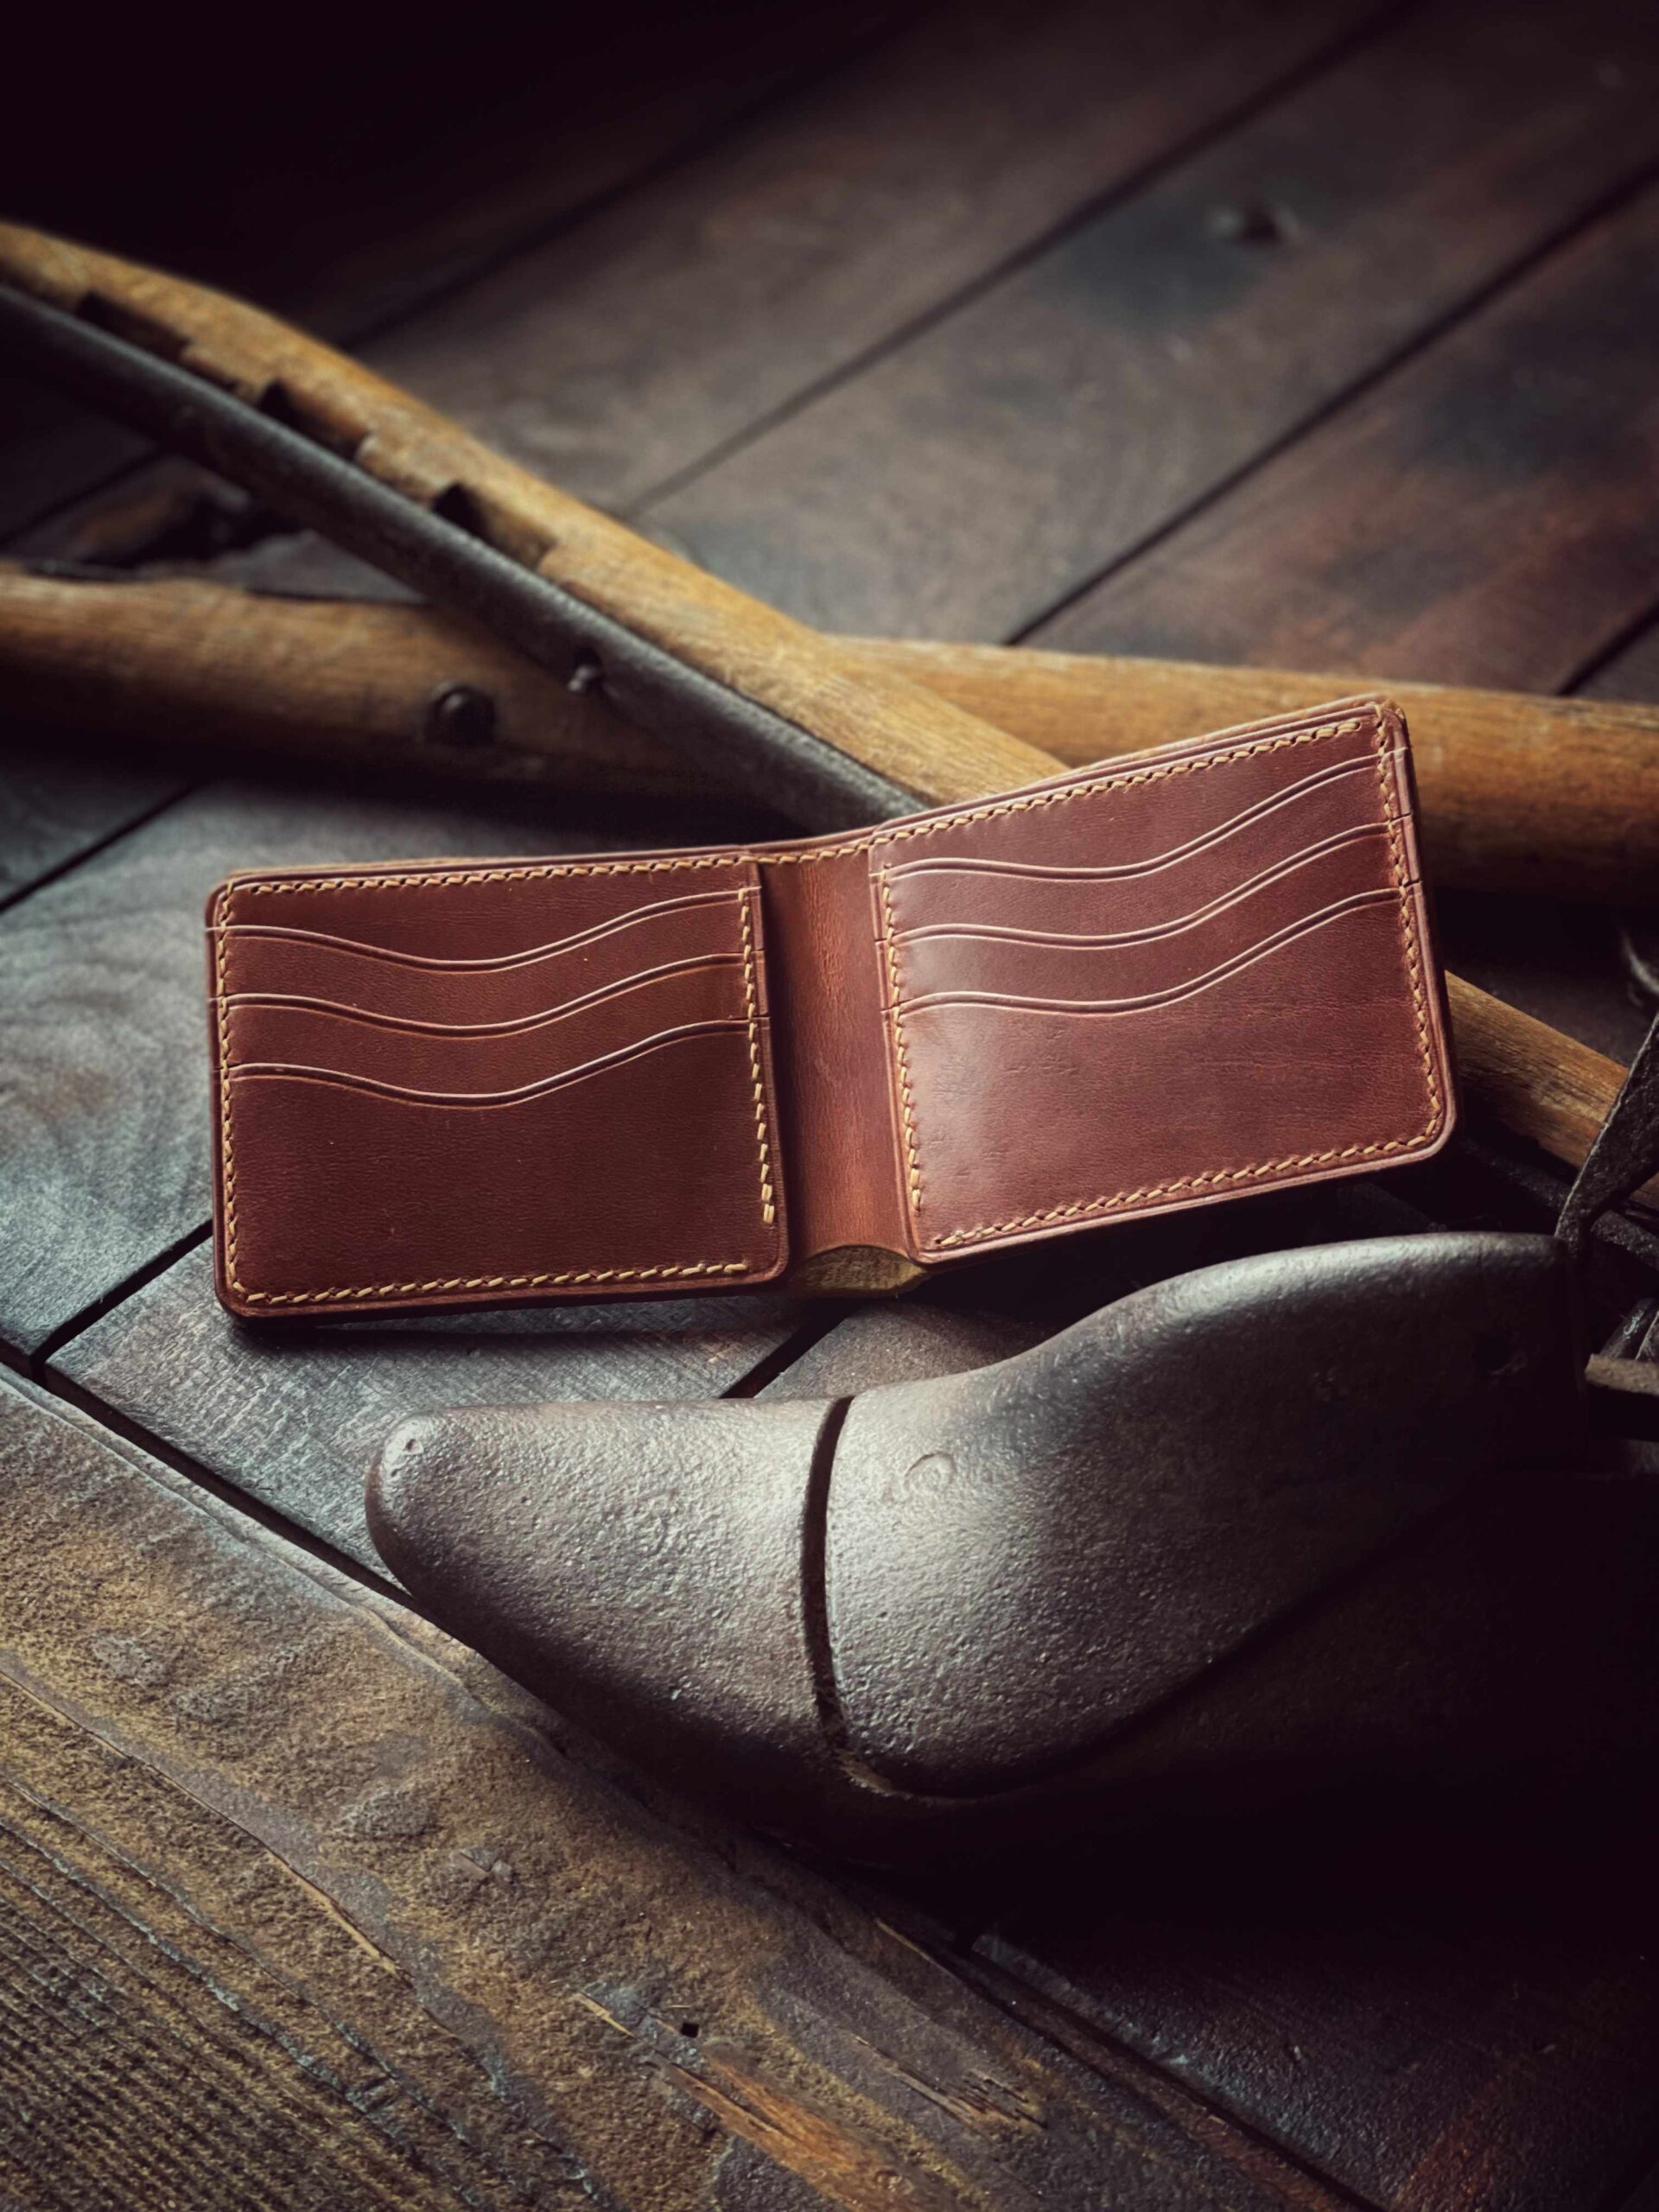 Cavlary Western Goods | Best Western Quality Leather Goods